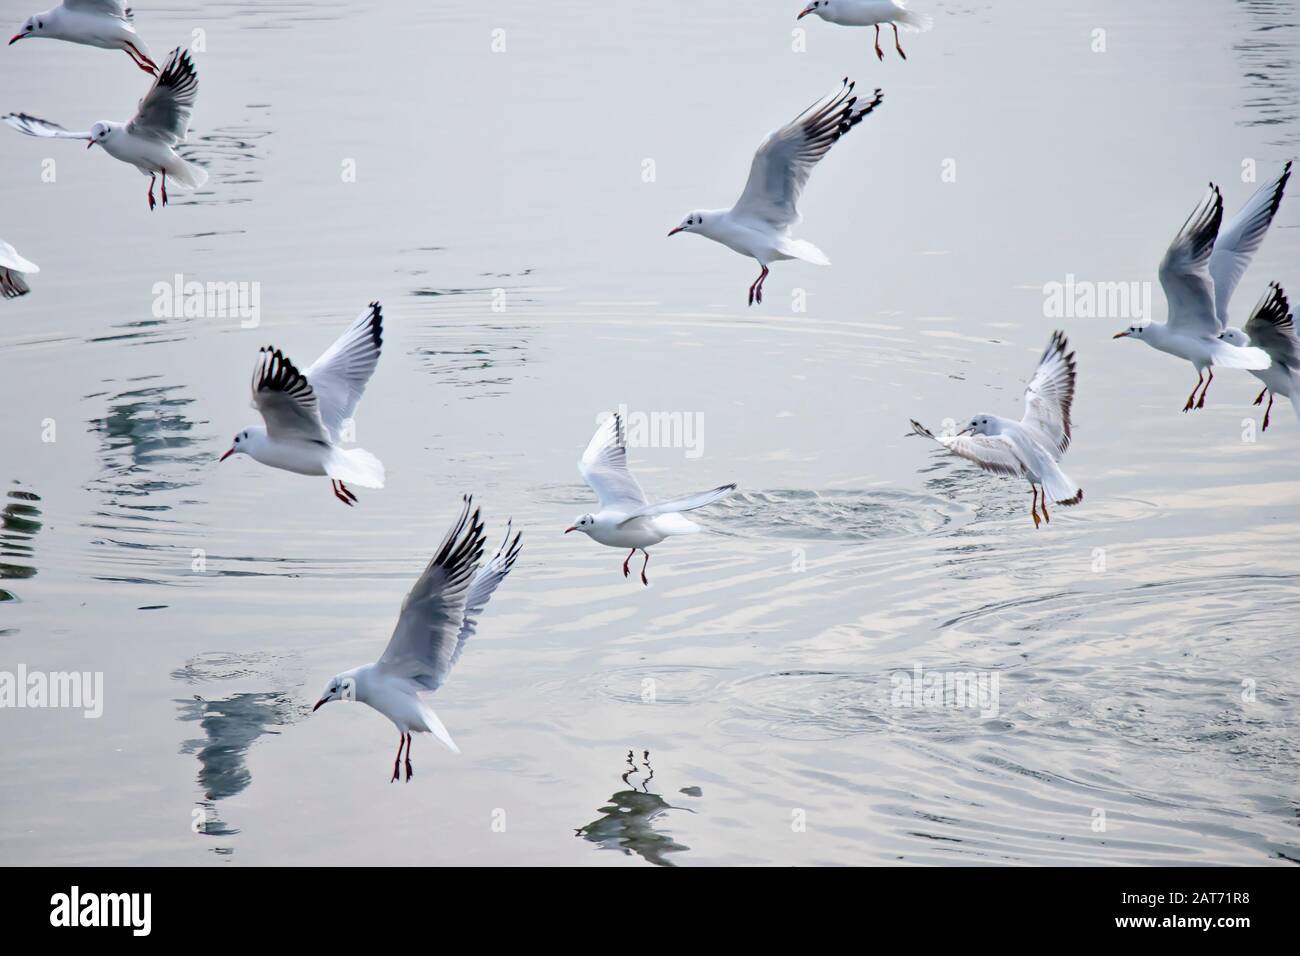 Flock of seagulls flying above water in winter, with reflections and ripples Stock Photo